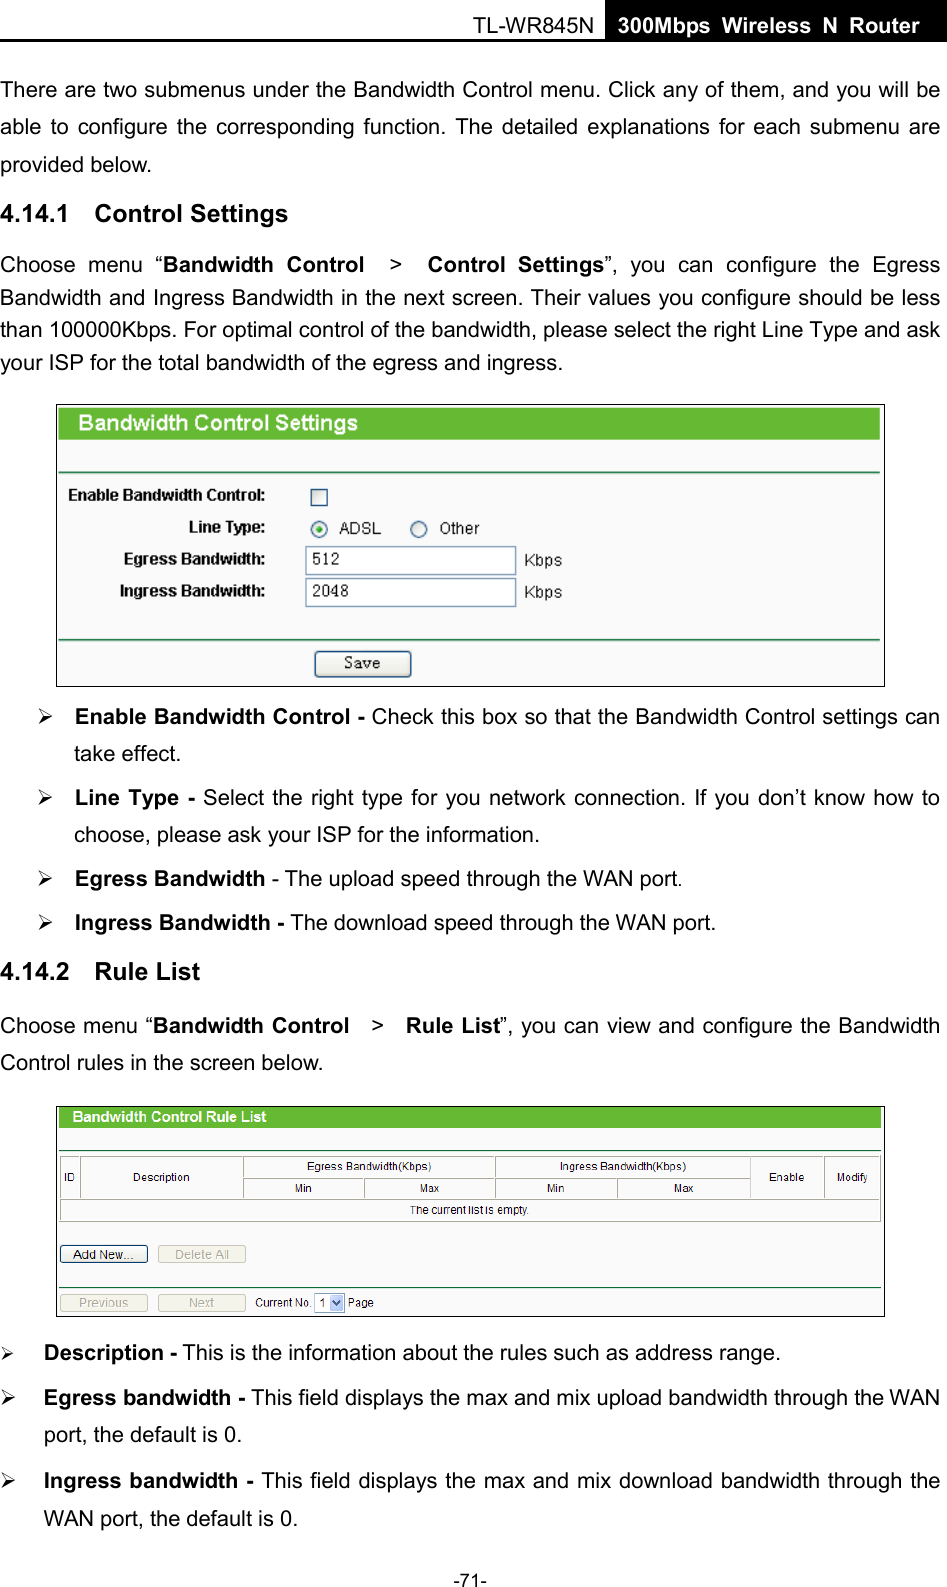  TL-WR845N  300Mbps Wireless N Router    There are two submenus under the Bandwidth Control menu. Click any of them, and you will be able to configure the corresponding function. The detailed explanations for each submenu are provided below. 4.14.1 Control Settings Choose menu “Bandwidth Control  &gt;   Control Settings”, you can configure the Egress Bandwidth and Ingress Bandwidth in the next screen. Their values you configure should be less than 100000Kbps. For optimal control of the bandwidth, please select the right Line Type and ask your ISP for the total bandwidth of the egress and ingress.   Enable Bandwidth Control - Check this box so that the Bandwidth Control settings can take effect.  Line Type - Select the right type for you network connection. If you don’t know how to choose, please ask your ISP for the information.  Egress Bandwidth - The upload speed through the WAN port.  Ingress Bandwidth - The download speed through the WAN port. 4.14.2 Rule List Choose menu “Bandwidth Control   &gt;   Rule List”, you can view and configure the Bandwidth Control rules in the screen below.   Description - This is the information about the rules such as address range.  Egress bandwidth - This field displays the max and mix upload bandwidth through the WAN port, the default is 0.  Ingress bandwidth - This field displays the max and mix download bandwidth through the WAN port, the default is 0. -71- 